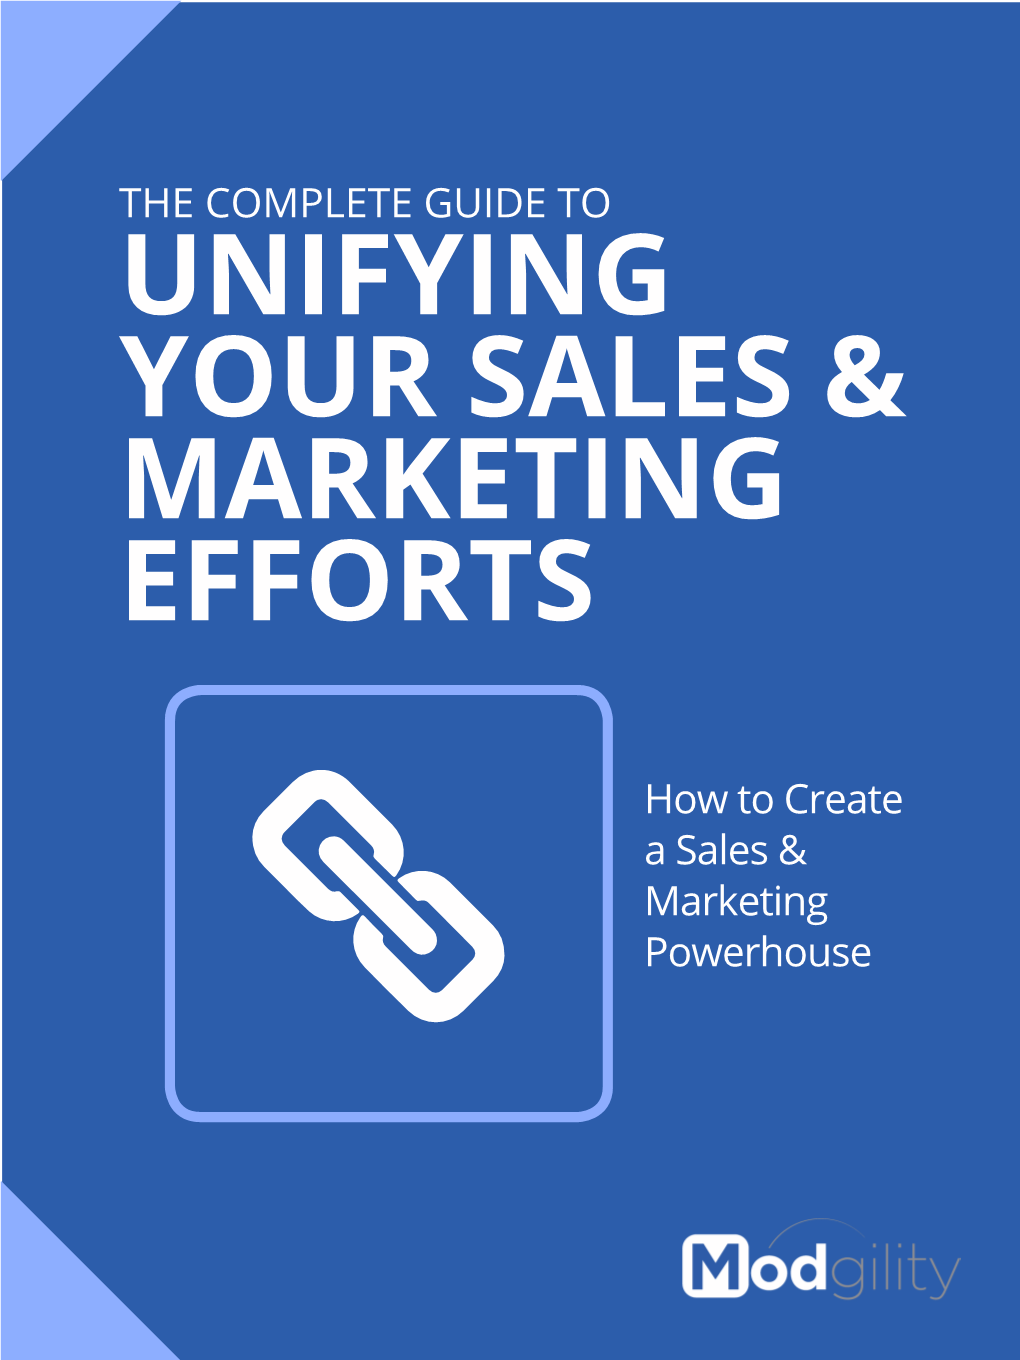 Unifying Your Sales & Marketing Efforts